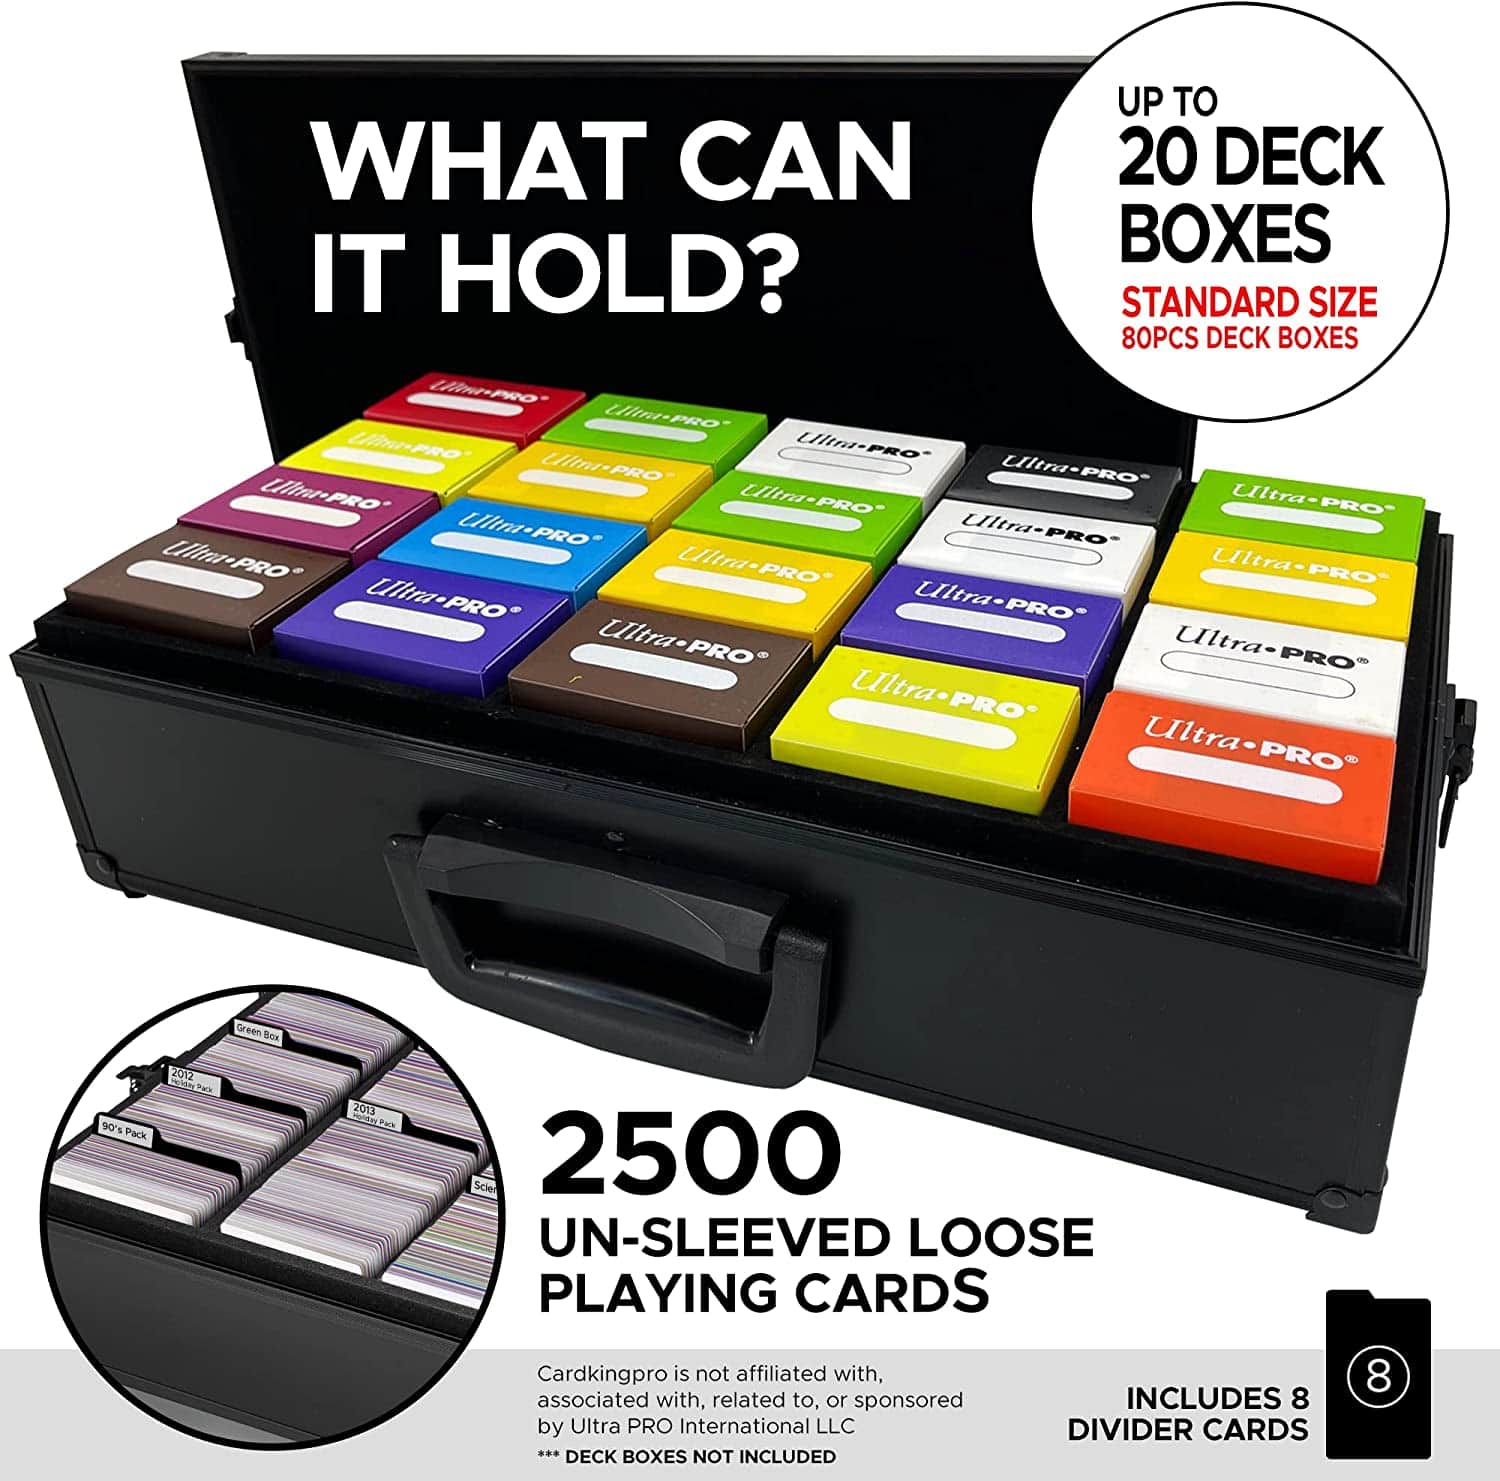 The Big Black Metal Box (Bbb Edition) Case Is Compatible with Magic The Gathering MtG All Standard Card Games (Game Not Included) Includes 8 Dividers